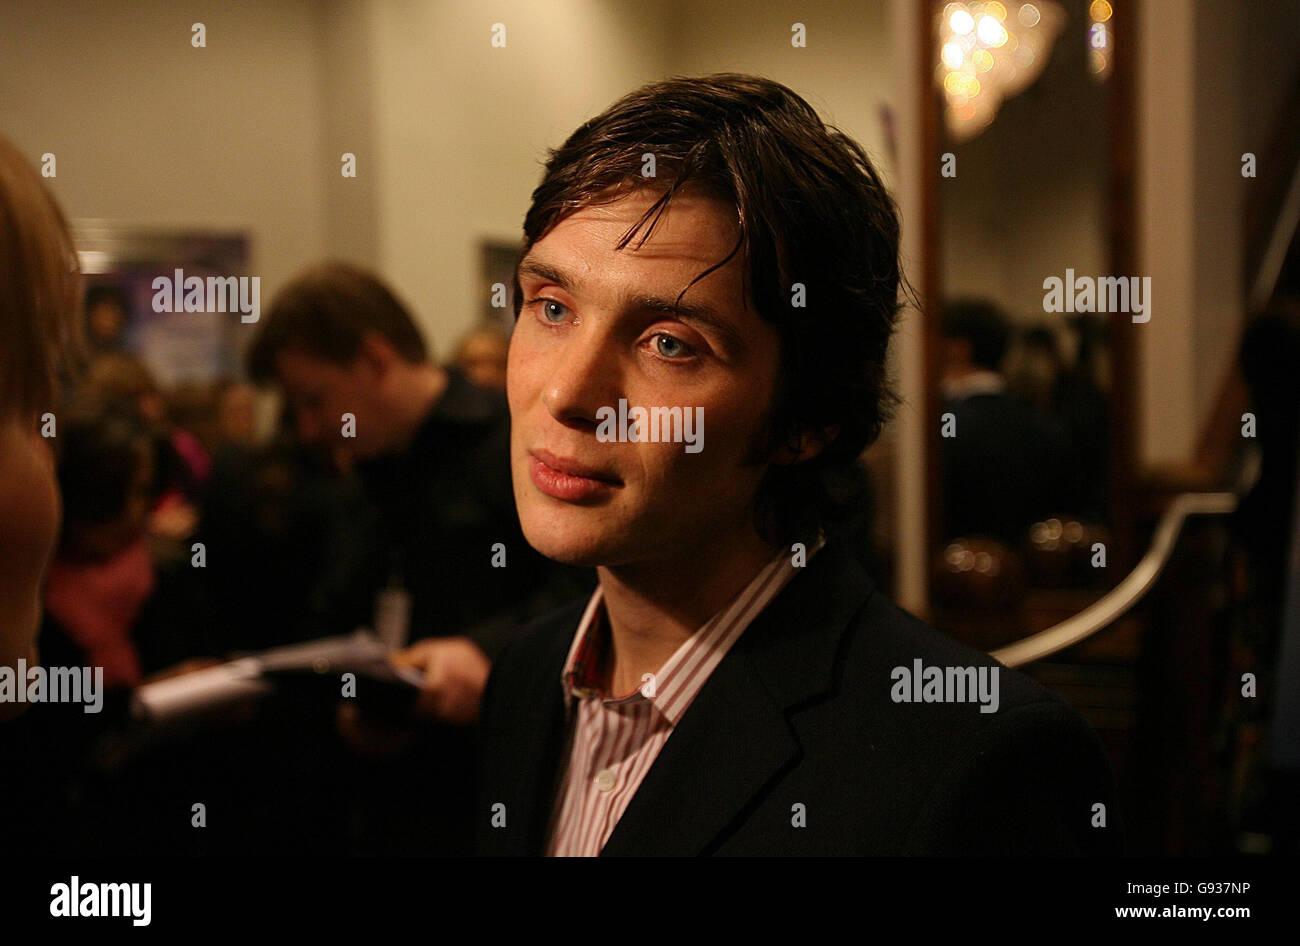 Actor Cillian Murphy at the Irish Premiere of Neil Jordan's film 'Breakfast on Pluto' at The Savoy Cinema on O' Connell Street, Dublin Wednesday January 11 2006. PRESS ASSOCIATION Photo. Photo credit should read: Julien Behal/PA Stock Photo